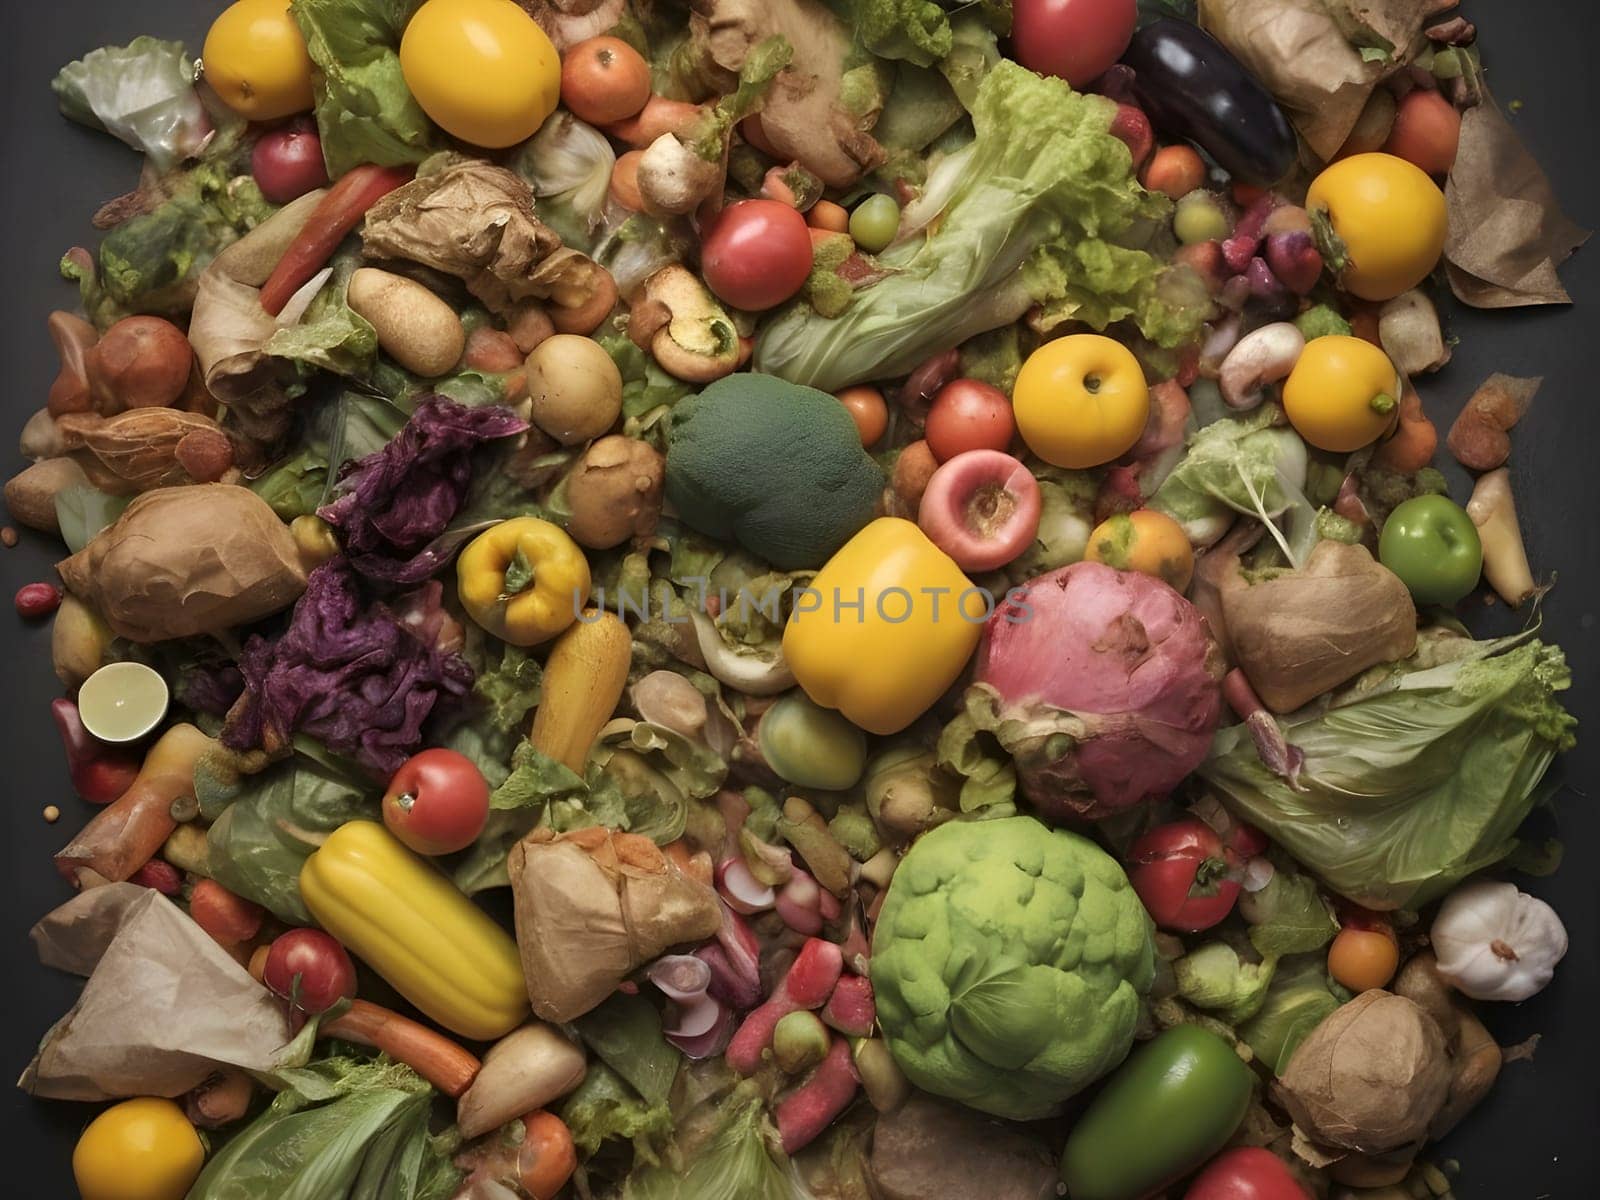 Culinary Canvas: A Vibrant Depiction of Food Waste Urgency.